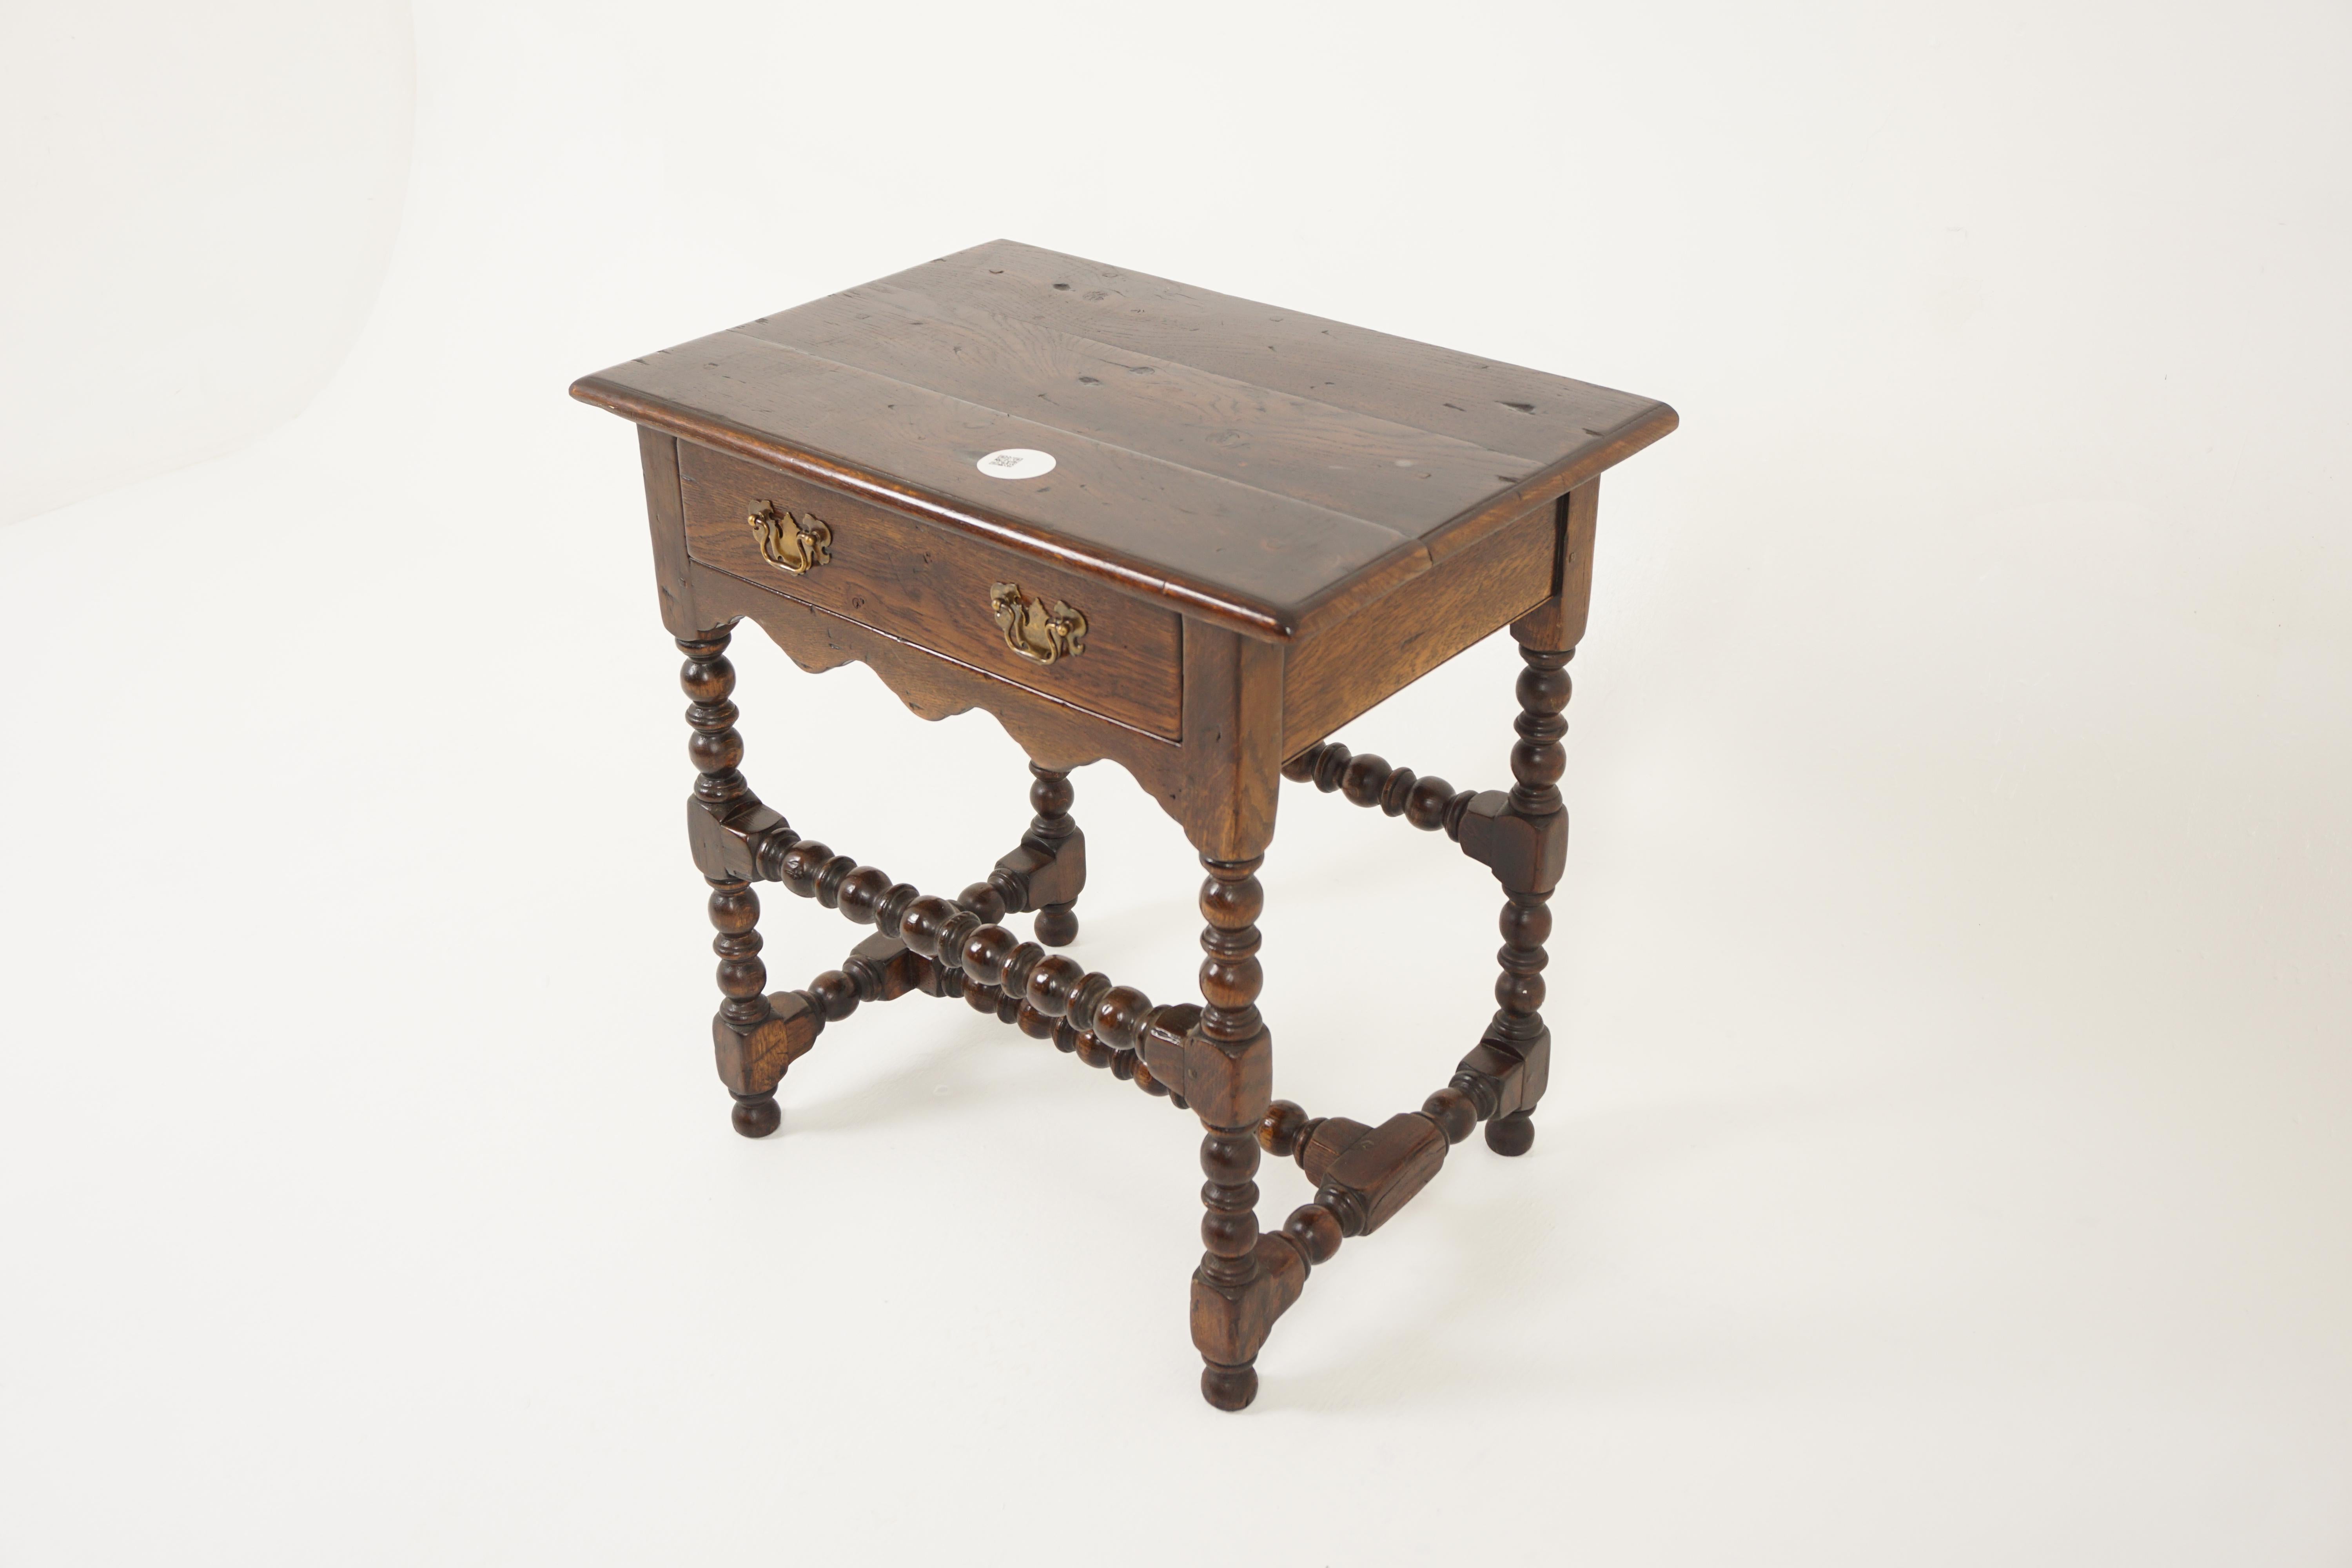 Antique Oak Table, Georgian Style Country Oak Hall Table, Side Table, Antique Furniture, Scotland 1940, H1136

+ Scotland 1840
+ Solid Oak
+ Original Finish
+ Moulded rectangular top with bevelled edge
+ Single working drawer with brass